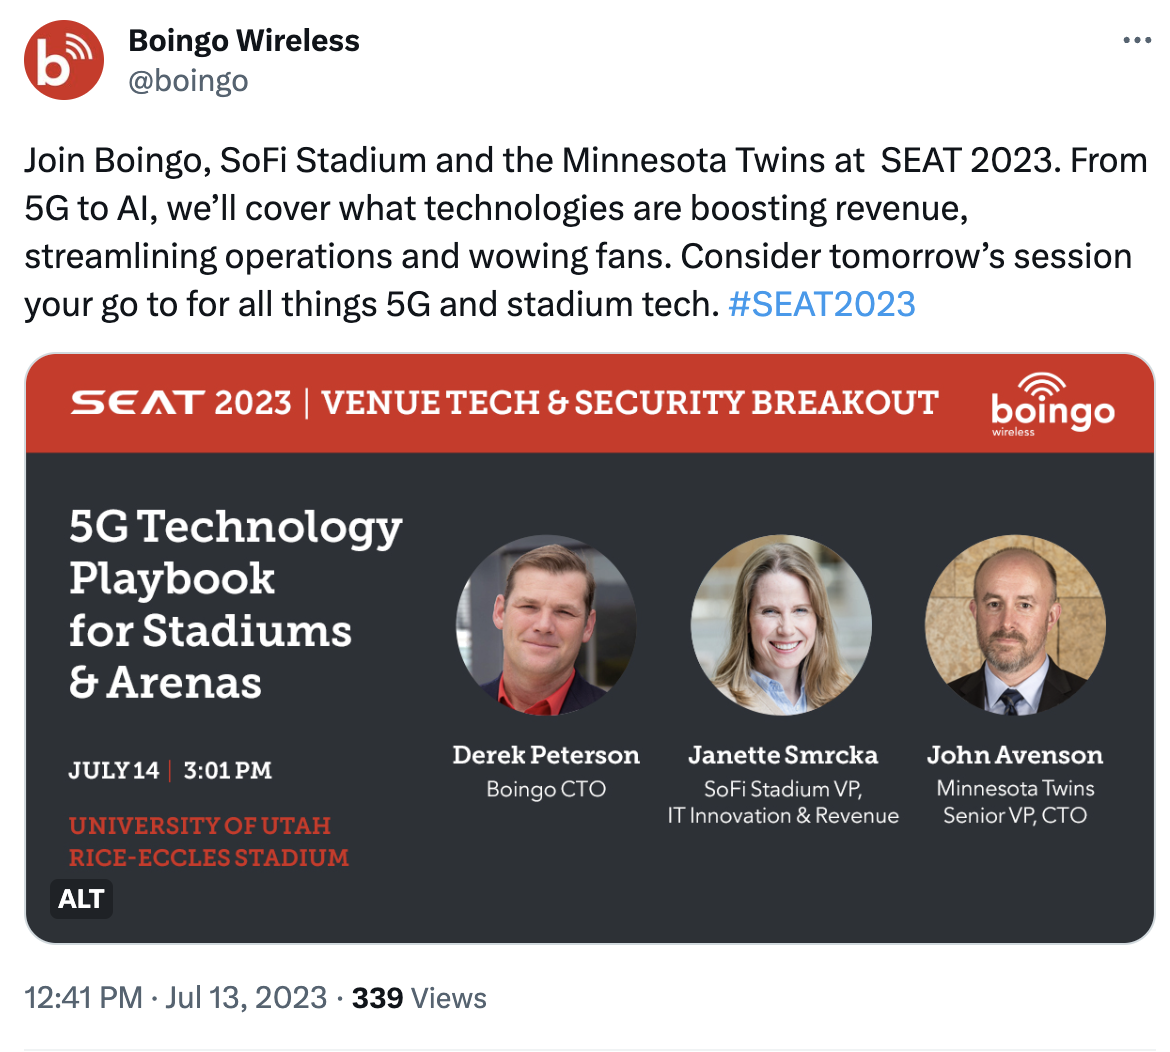 A screenshot of a Tweet from Boingo Wireless that reads: "Join Boingo, SoFI Stadium and the Minnesota Twins at SEAT 2023. From 5G to AI, we'll cover what technologies are boosting revenue, streamlining operations and wowing fans. Consider tomorrow's session your go to for all things 5G and stadium tech. #SEAT2023